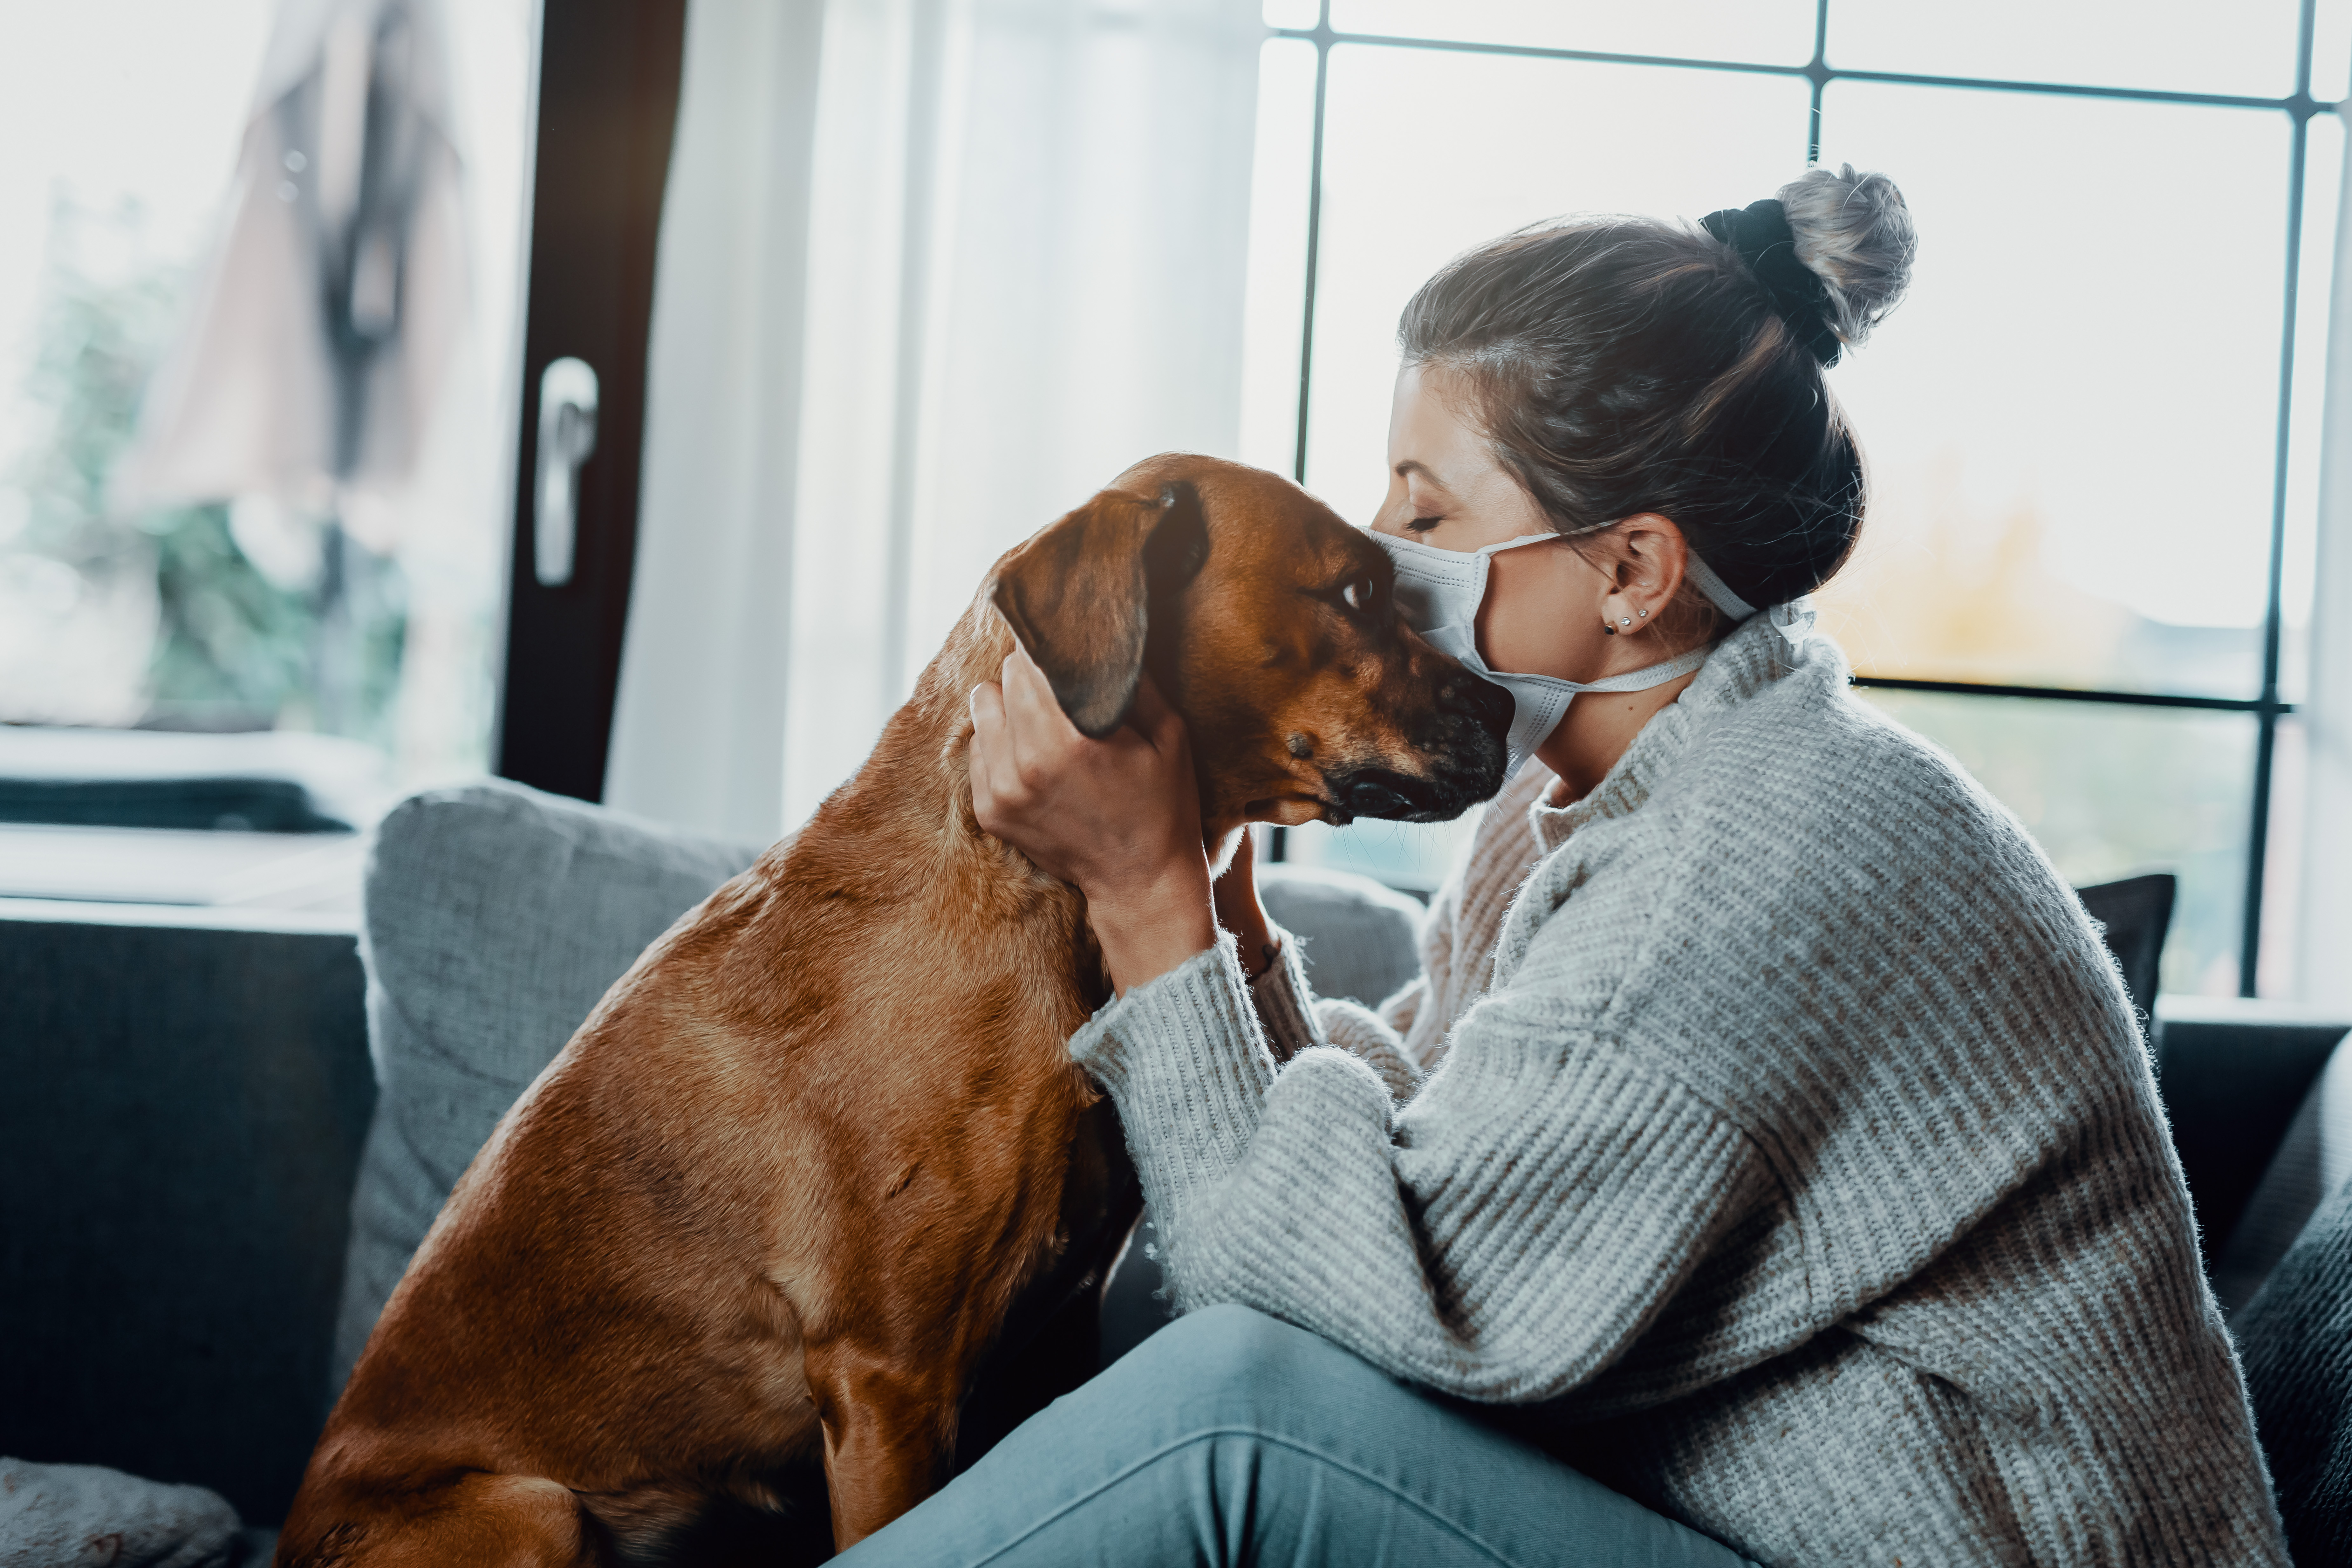 Dog getting the flu – can it really happen?